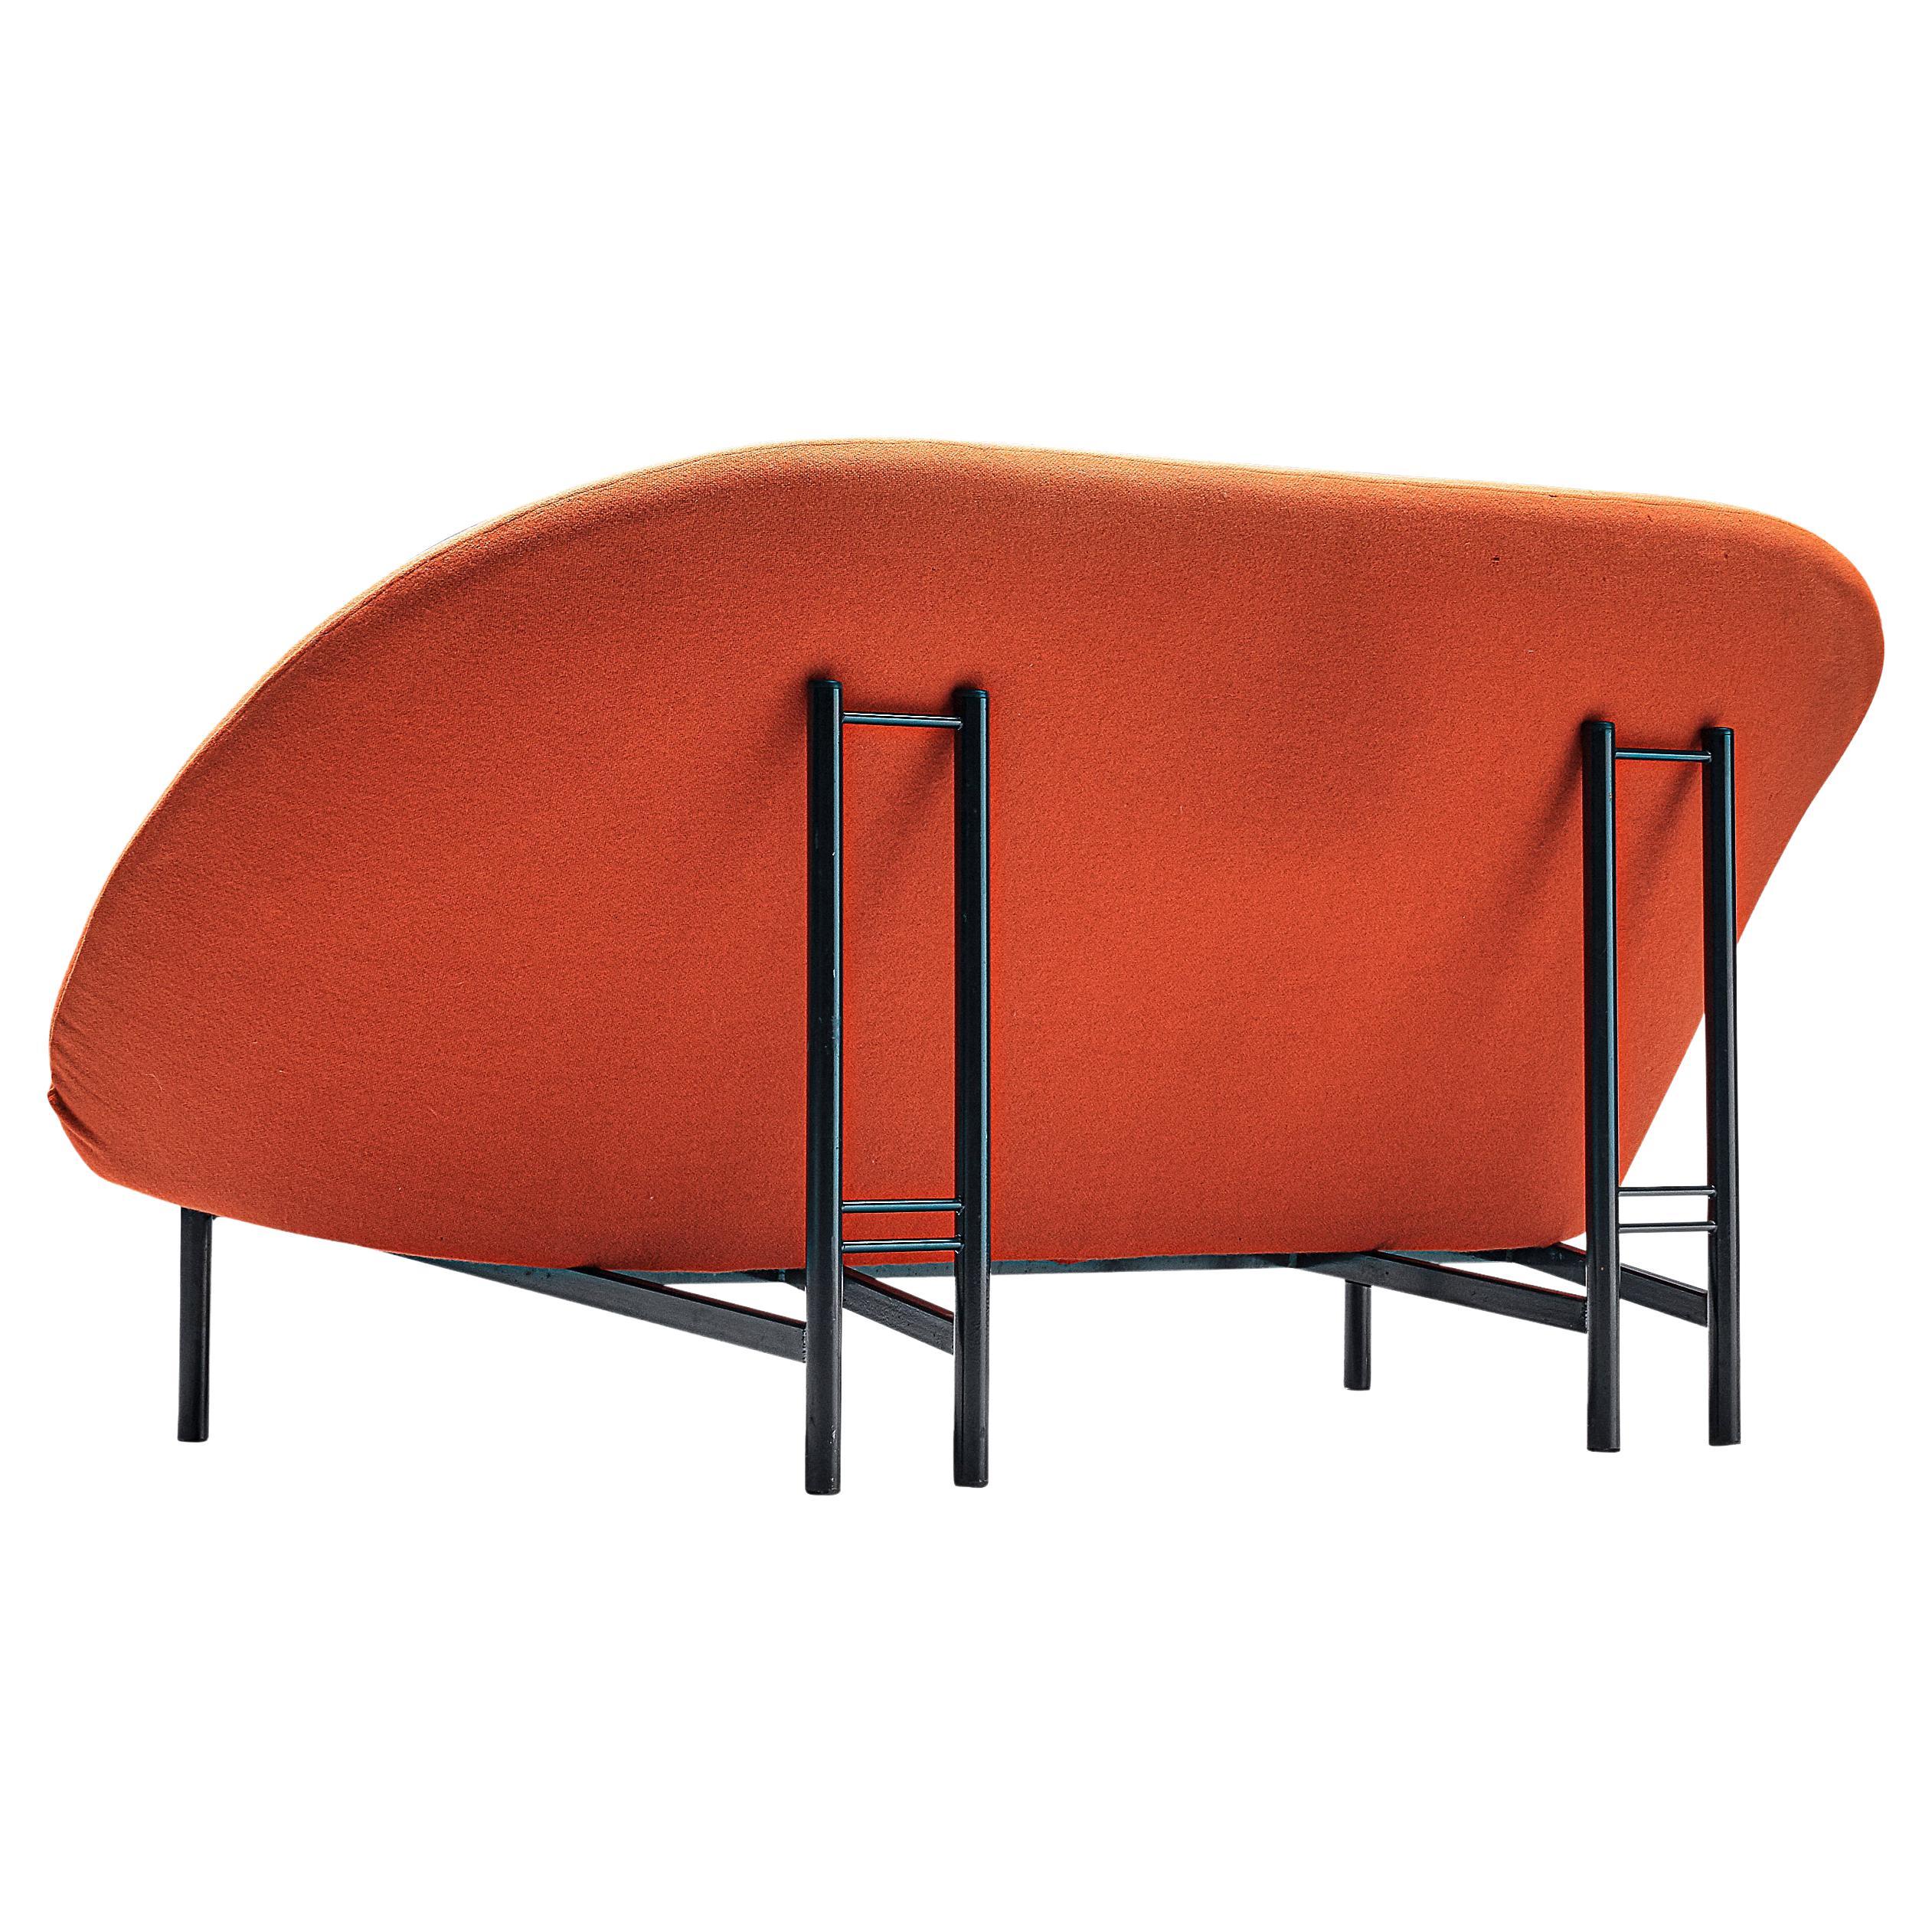 Theo Ruth for Artifort Sofa in Orange Red Upholstery  For Sale